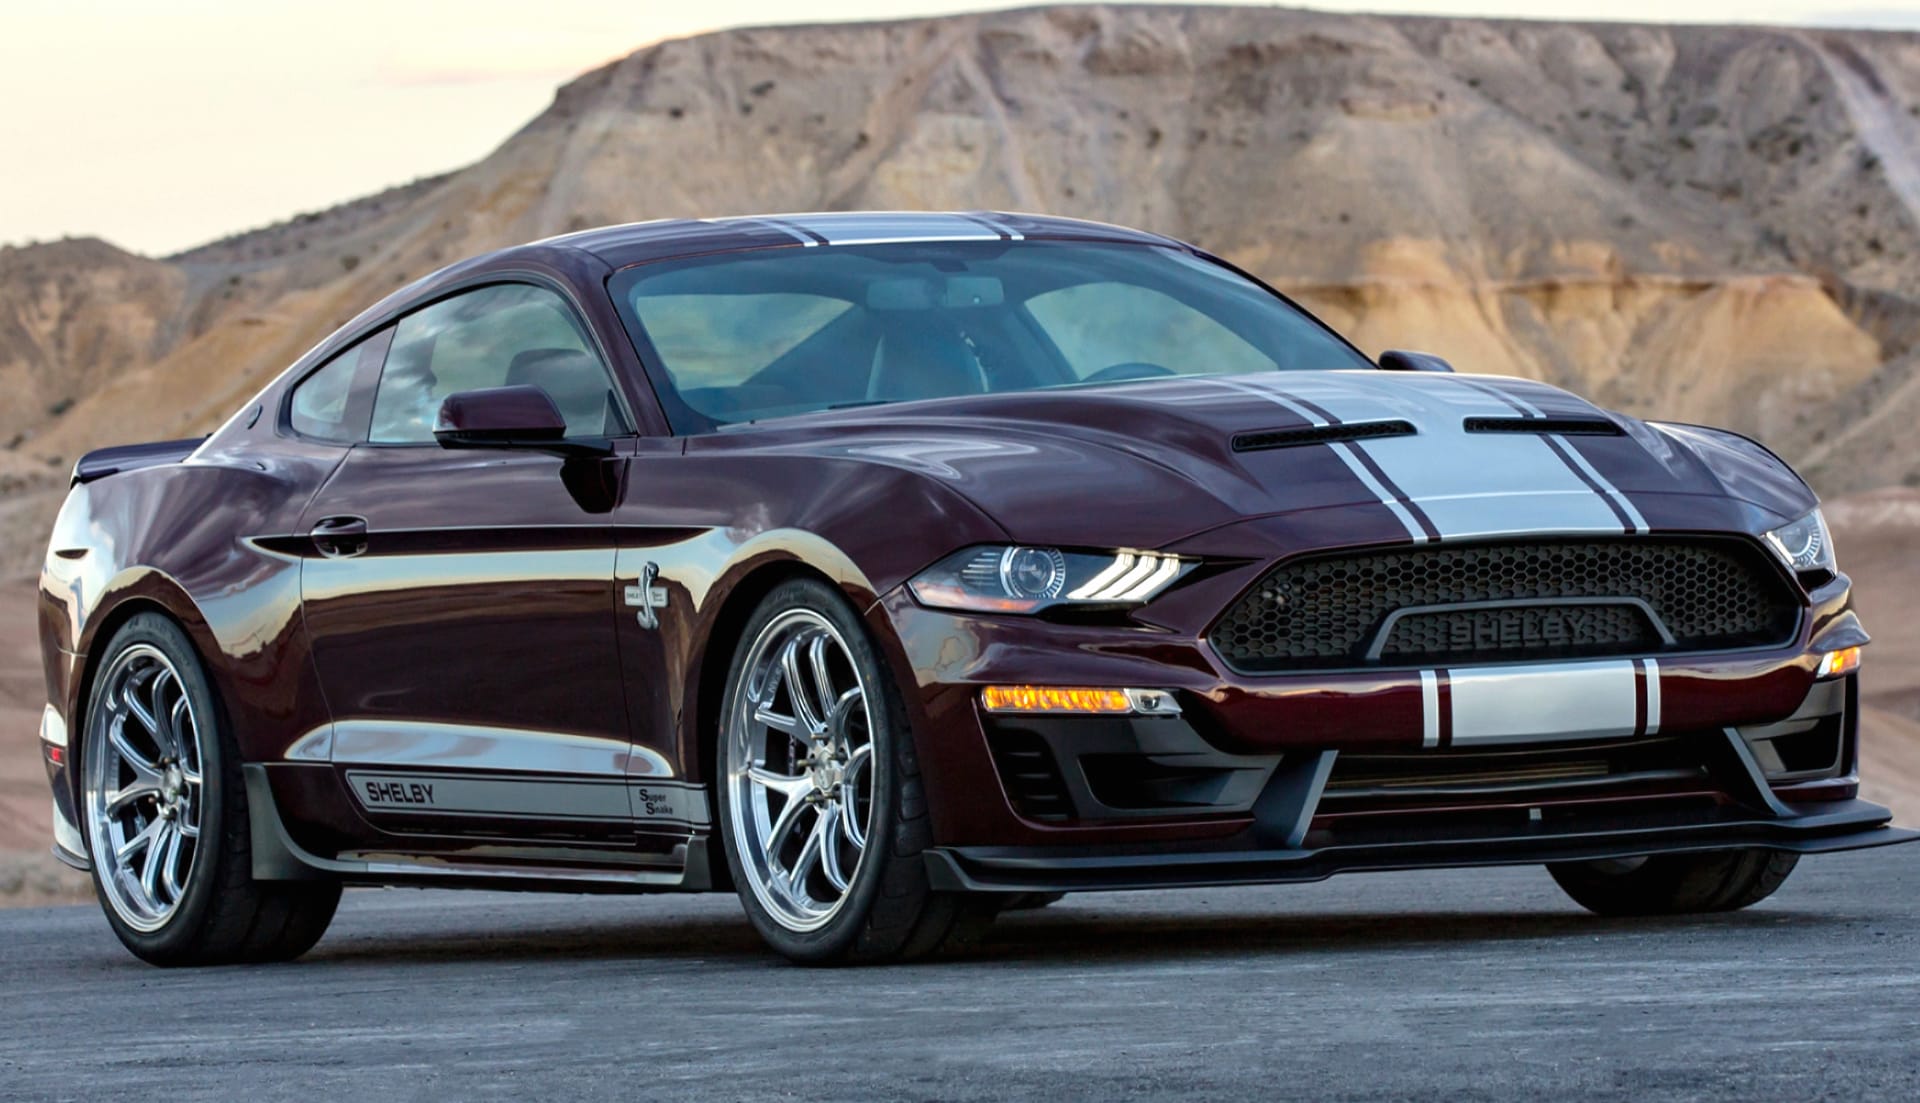 Shelby Super Snake wallpapers HD quality